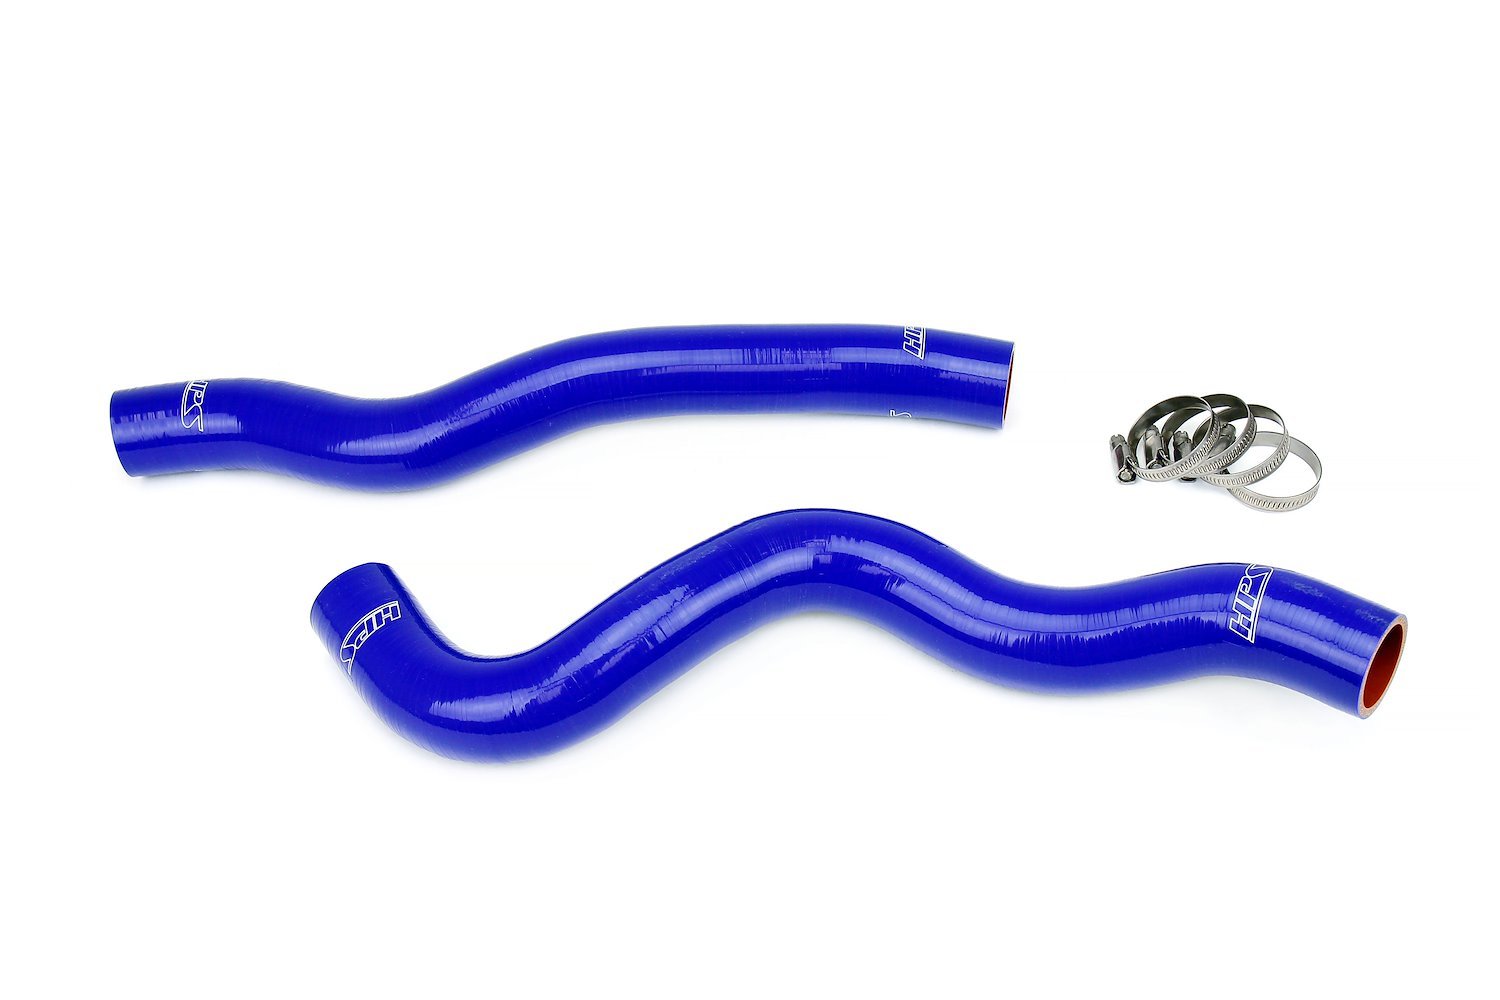 57-1964-BLUE Radiator Hose Kit, 3-Ply Reinforced Silicone, Replaces Rubber Radiator Coolant Hoses